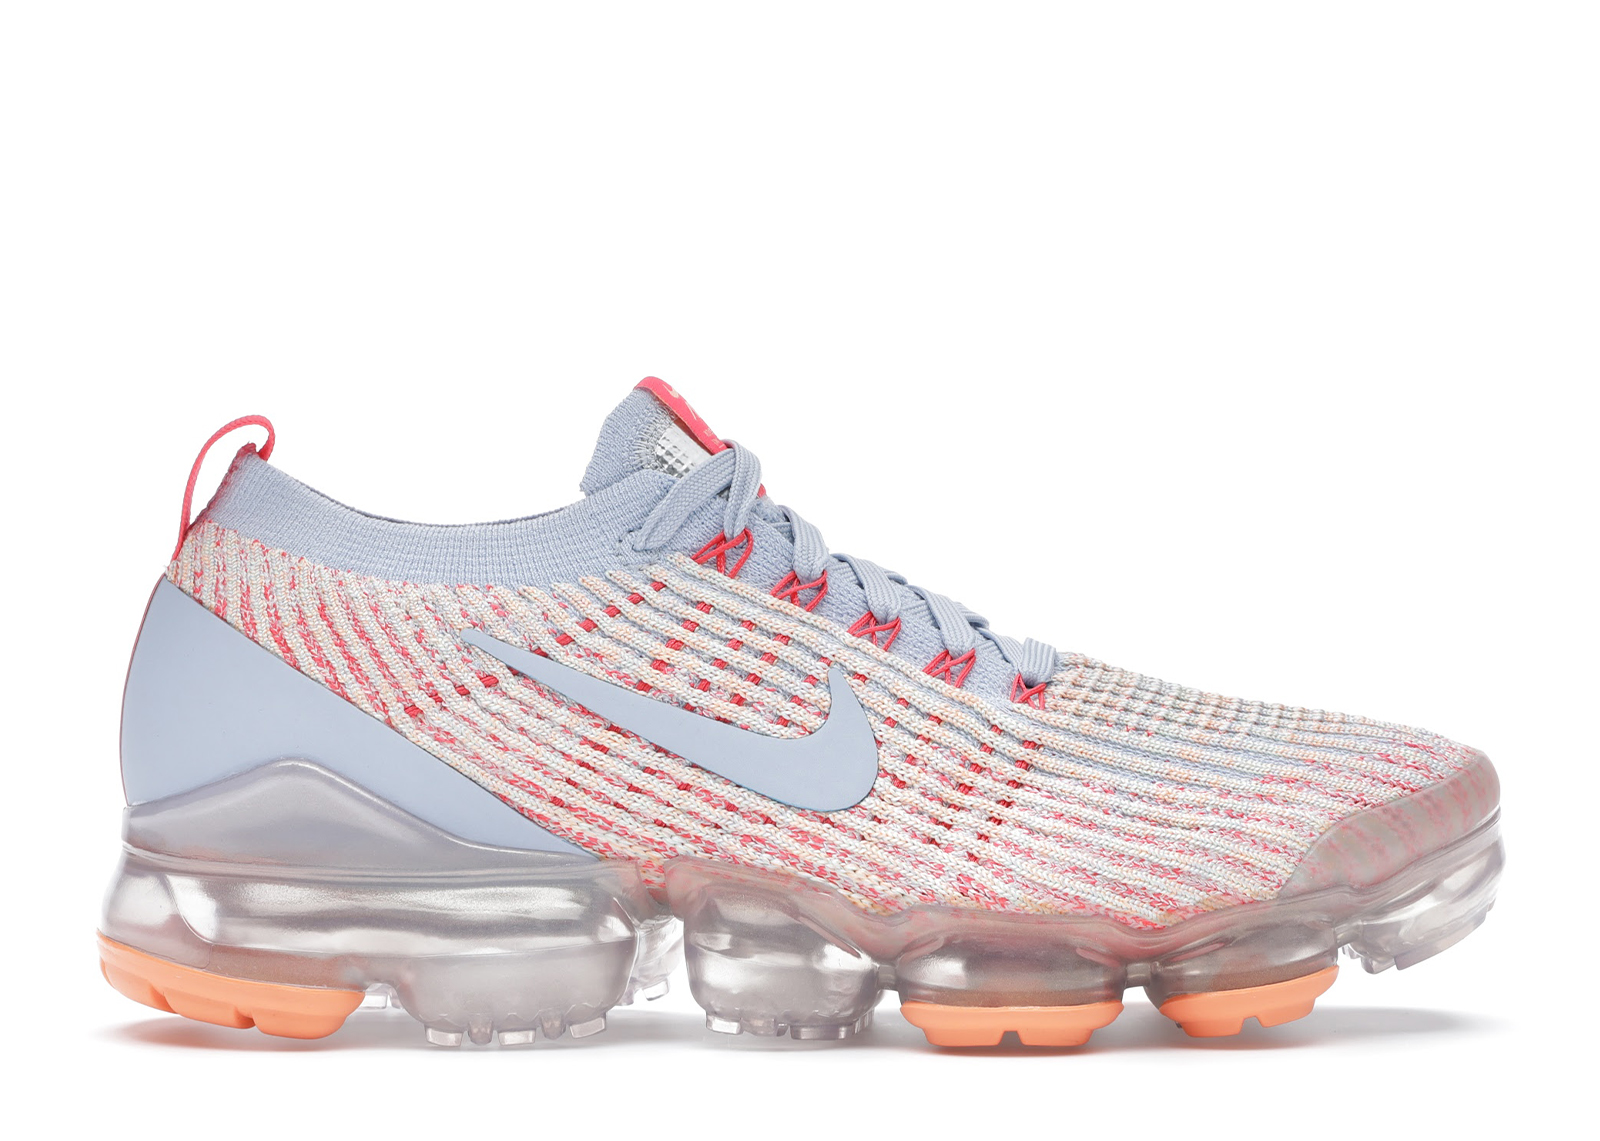 vapormax flyknit 2 blue and orange